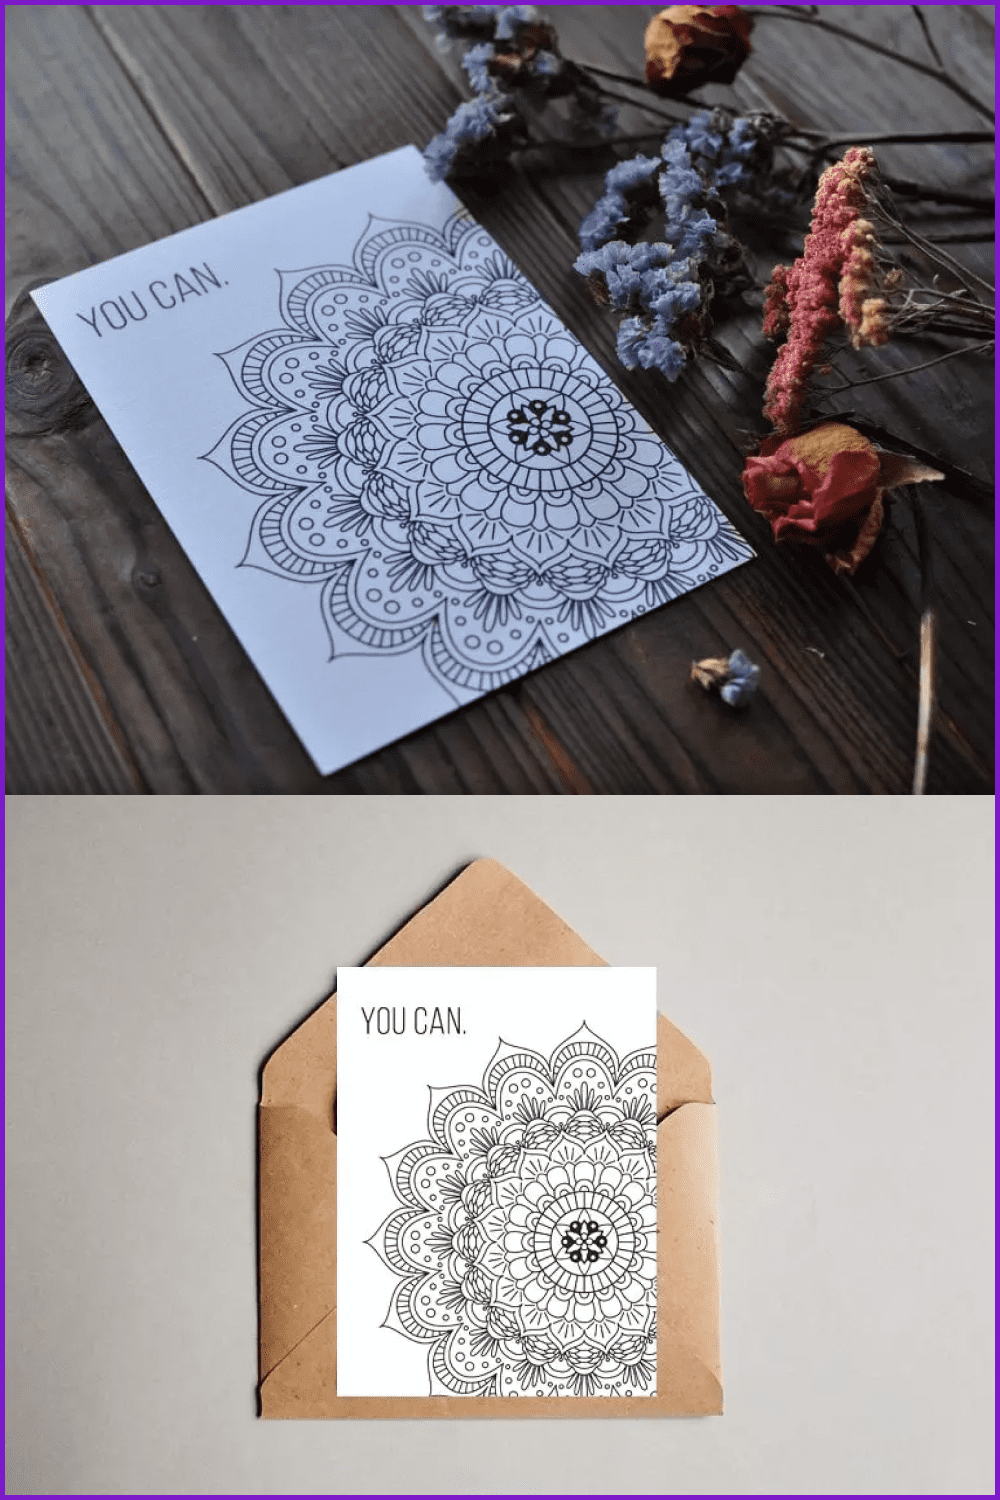 Postcard with a mandala and the inscription You can.